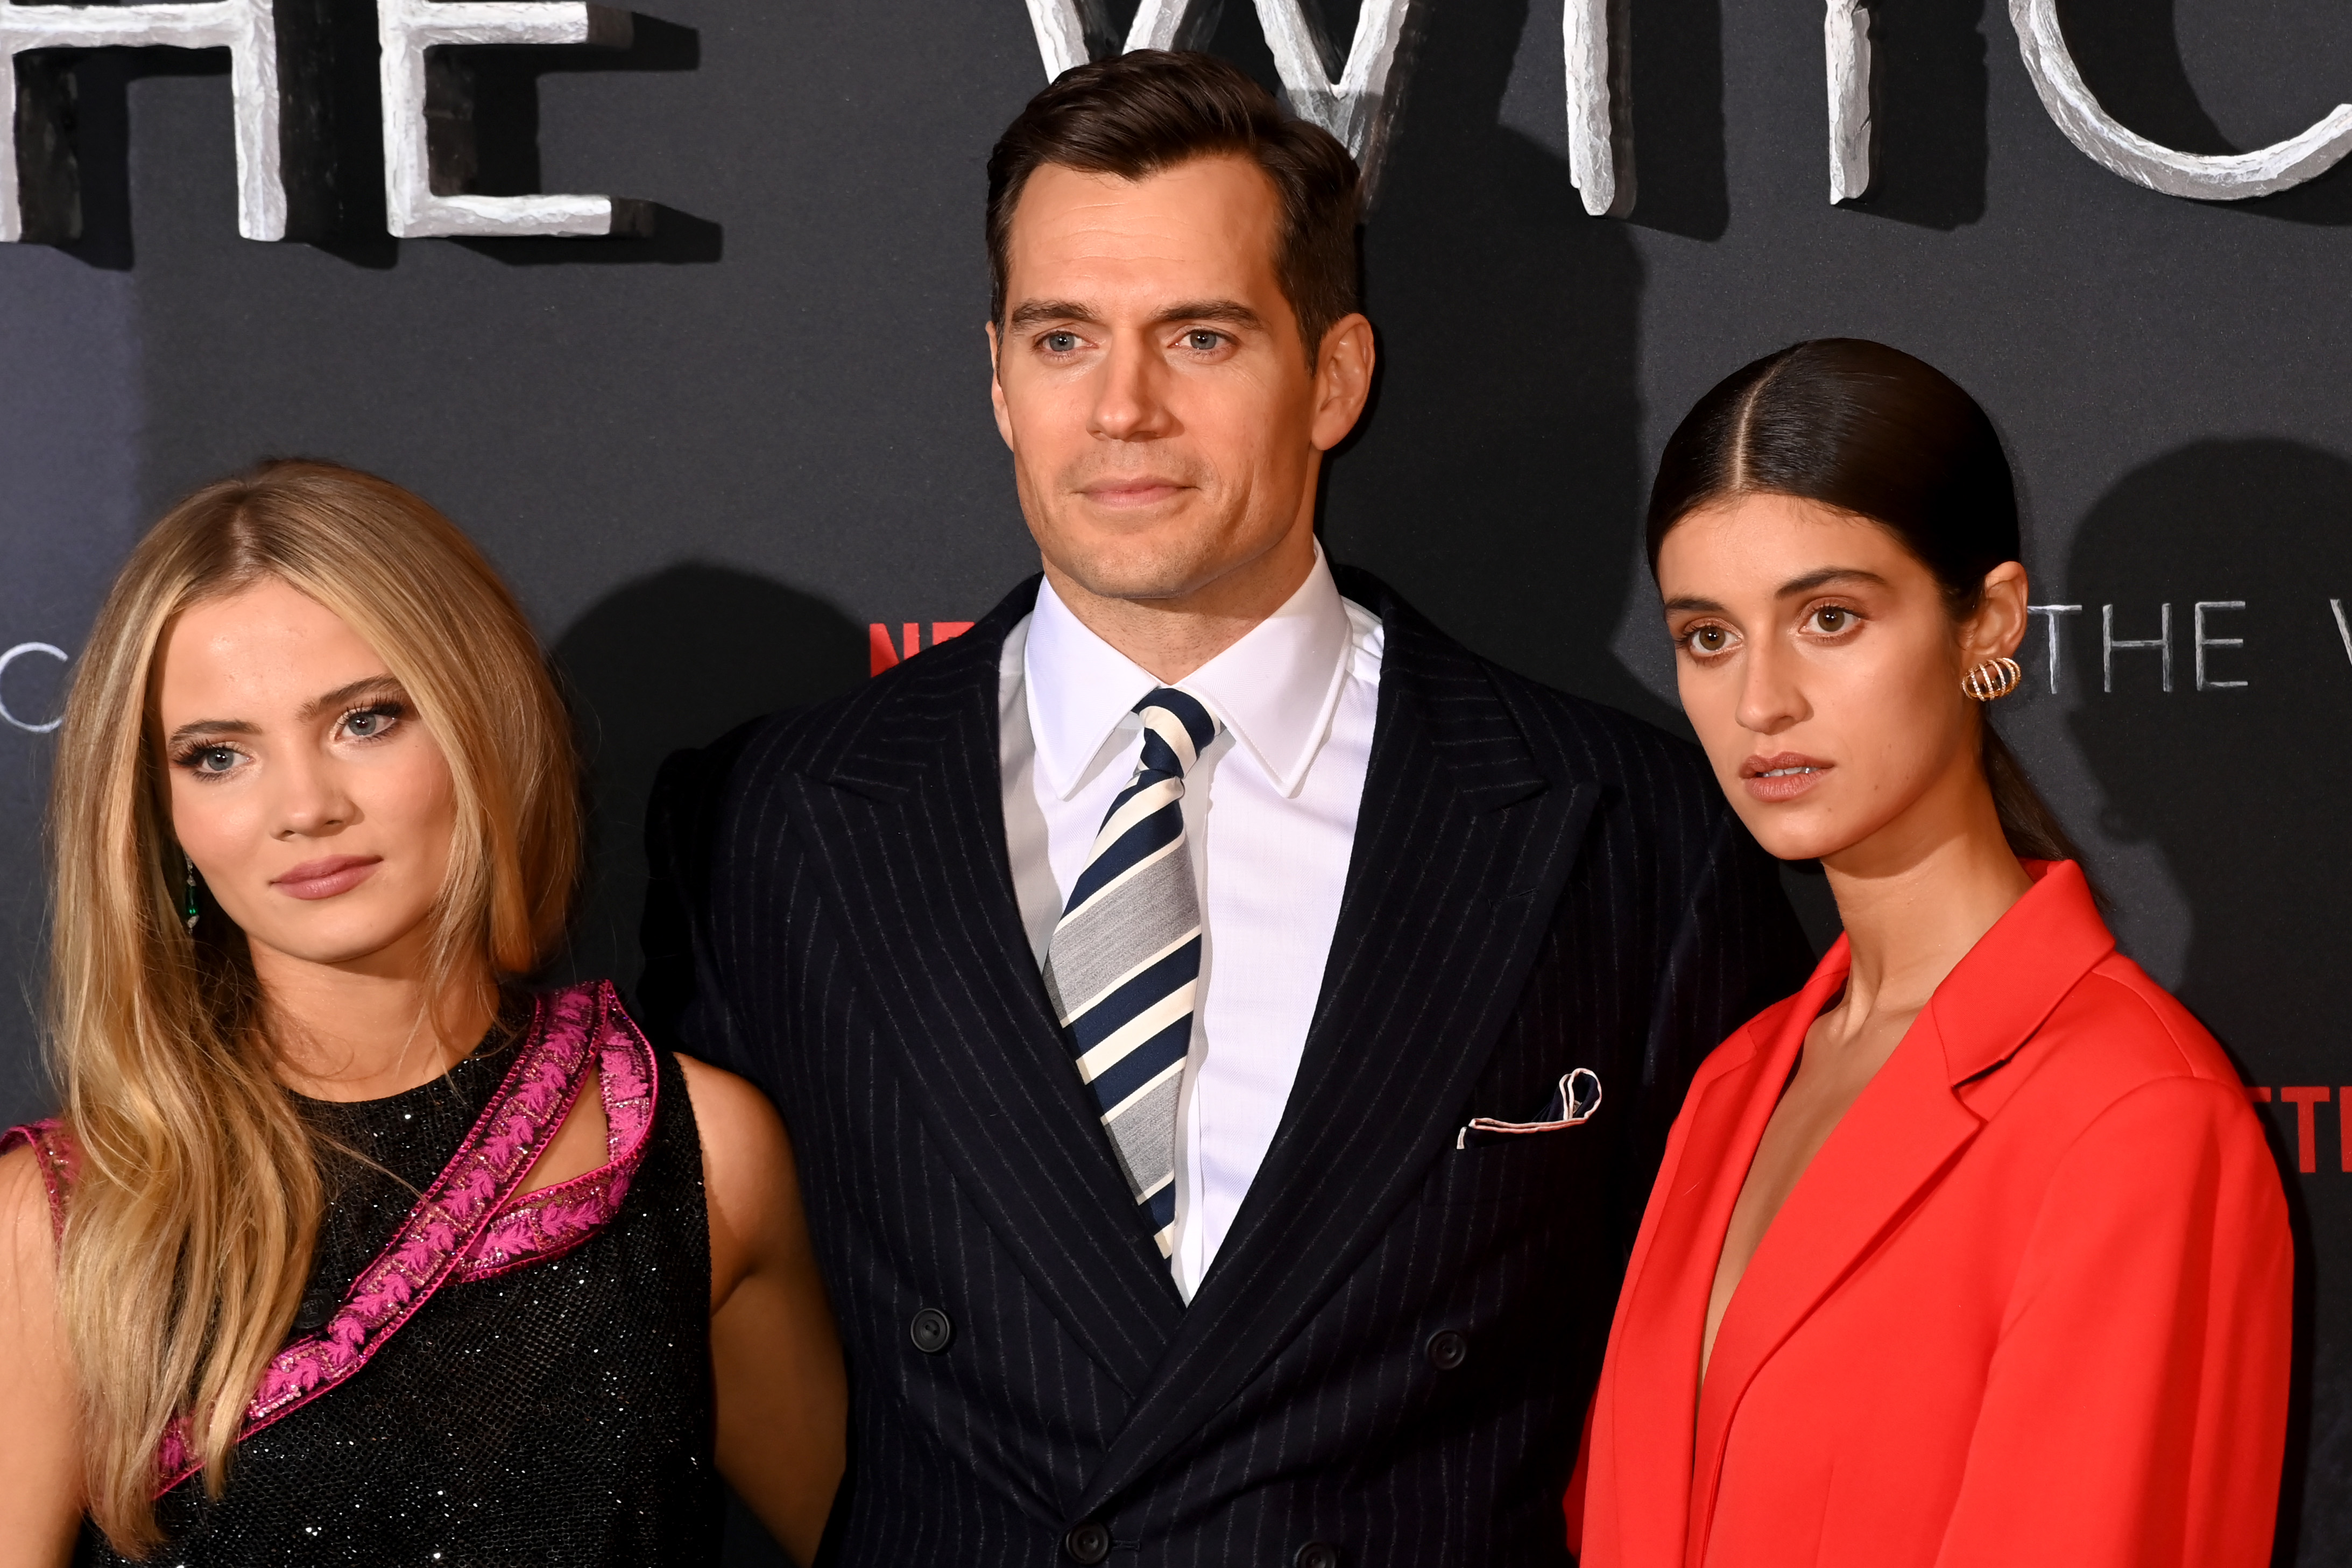 Freya Allan, Henry Cavill and, Anya Chalotra attend the world premiere of "The Witcher: Season 2" at Odeon Luxe Leicester Square, on December 1, 2021, in London, England. | Source: Getty Images